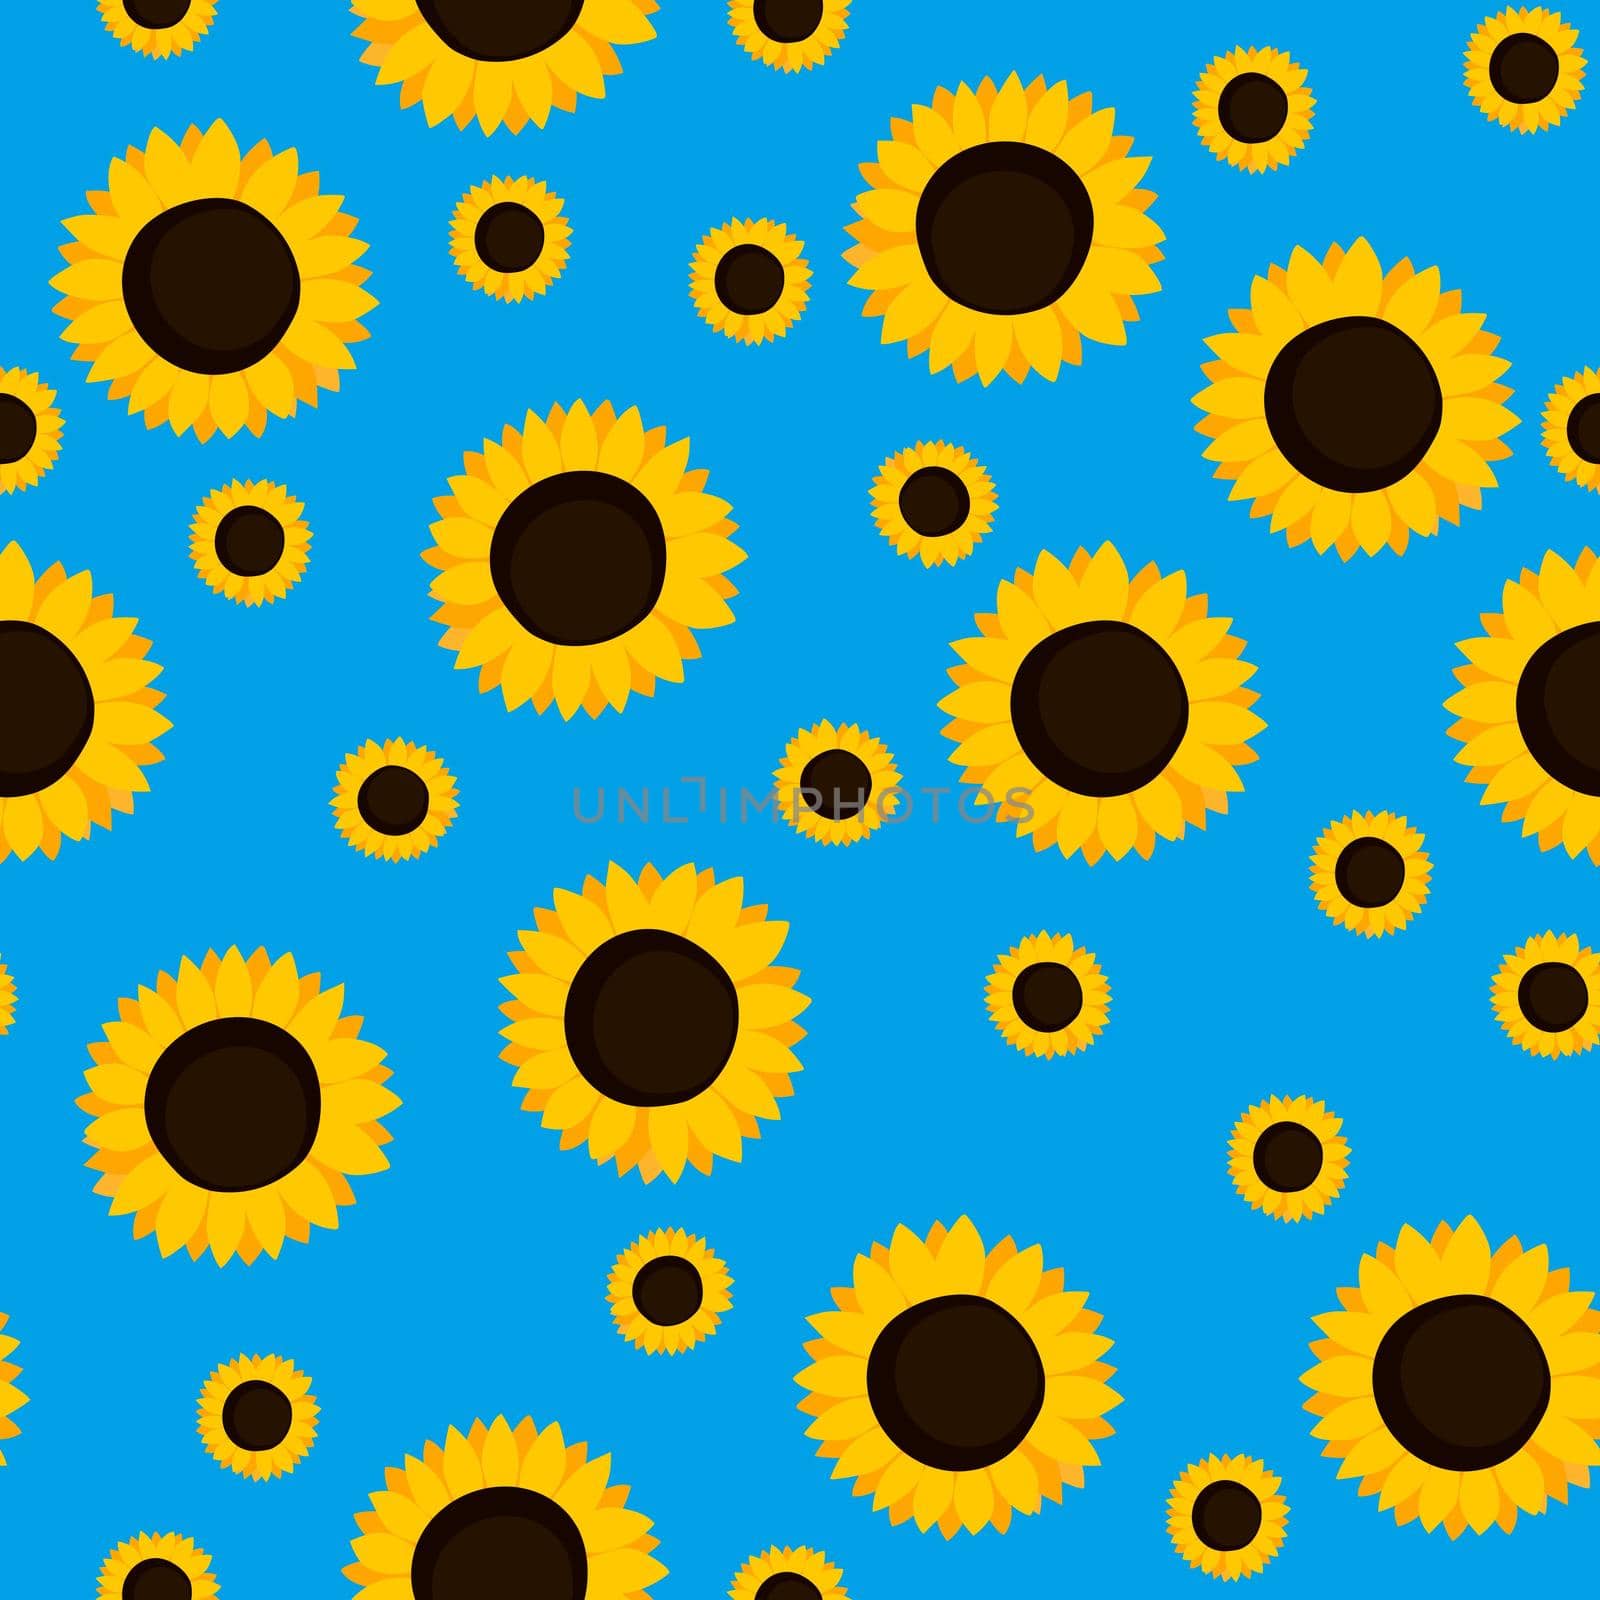 Summer colorful seamless pattern with orange sunflowers on blue background. Cartoon style. Design for fabric, textile, posters, card, paper. Beauty flowers. Vector illustration.